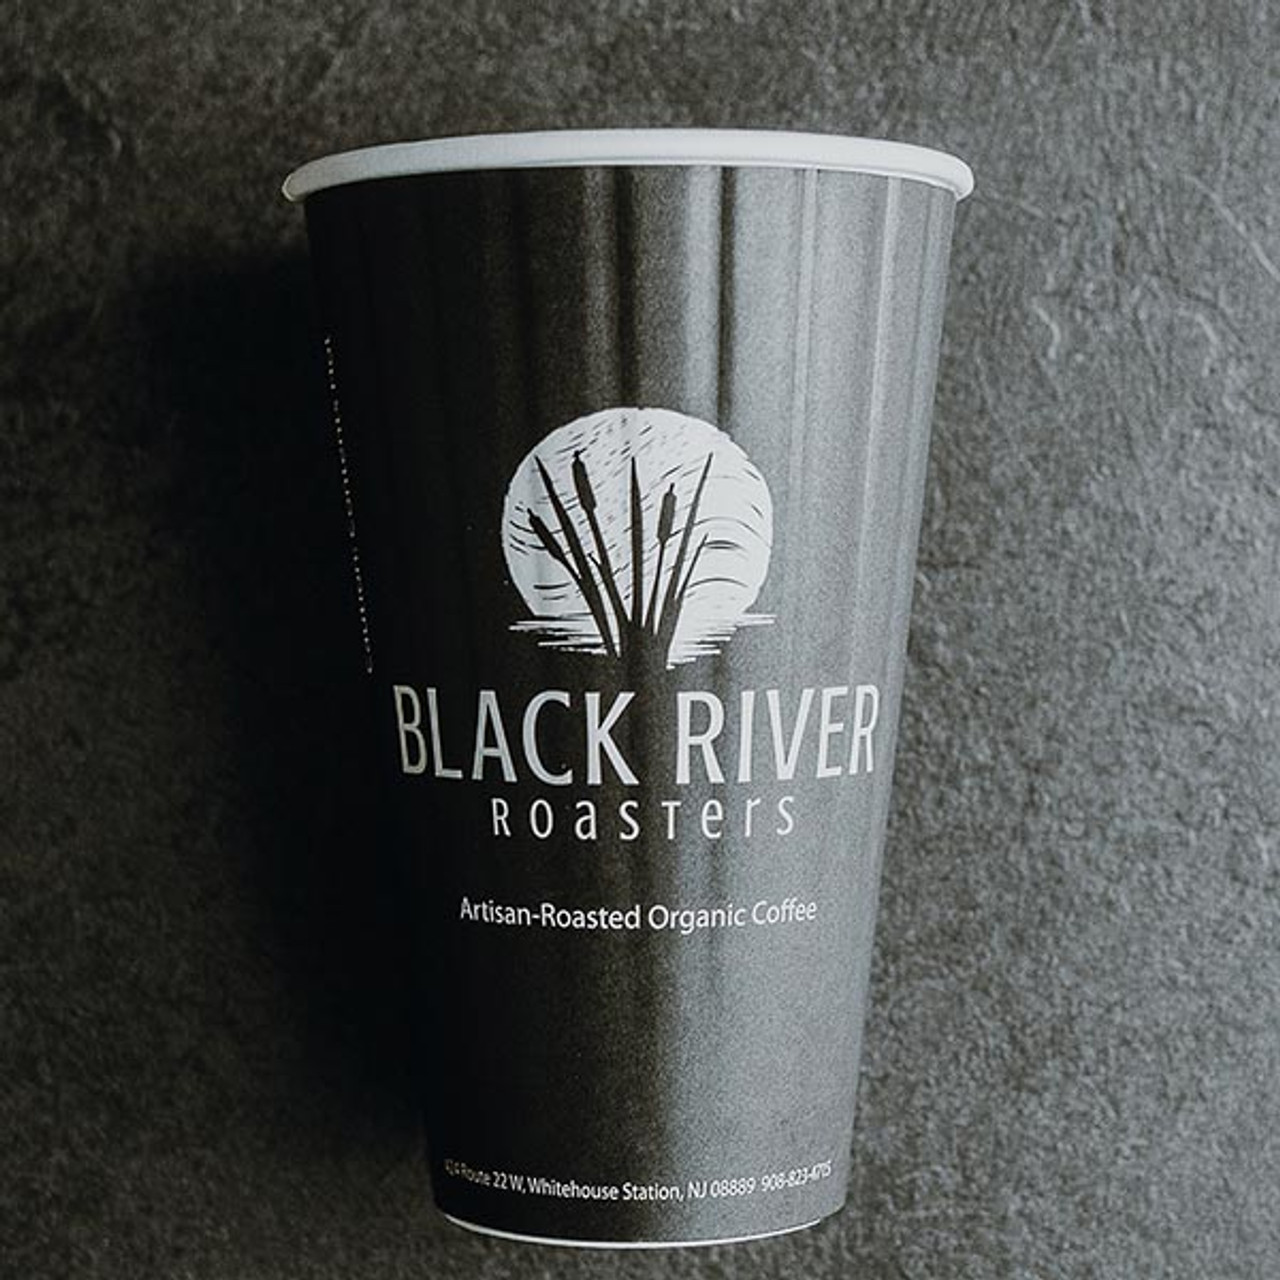 Custom Printed 16 oz Compostable Paper Coffee Cups